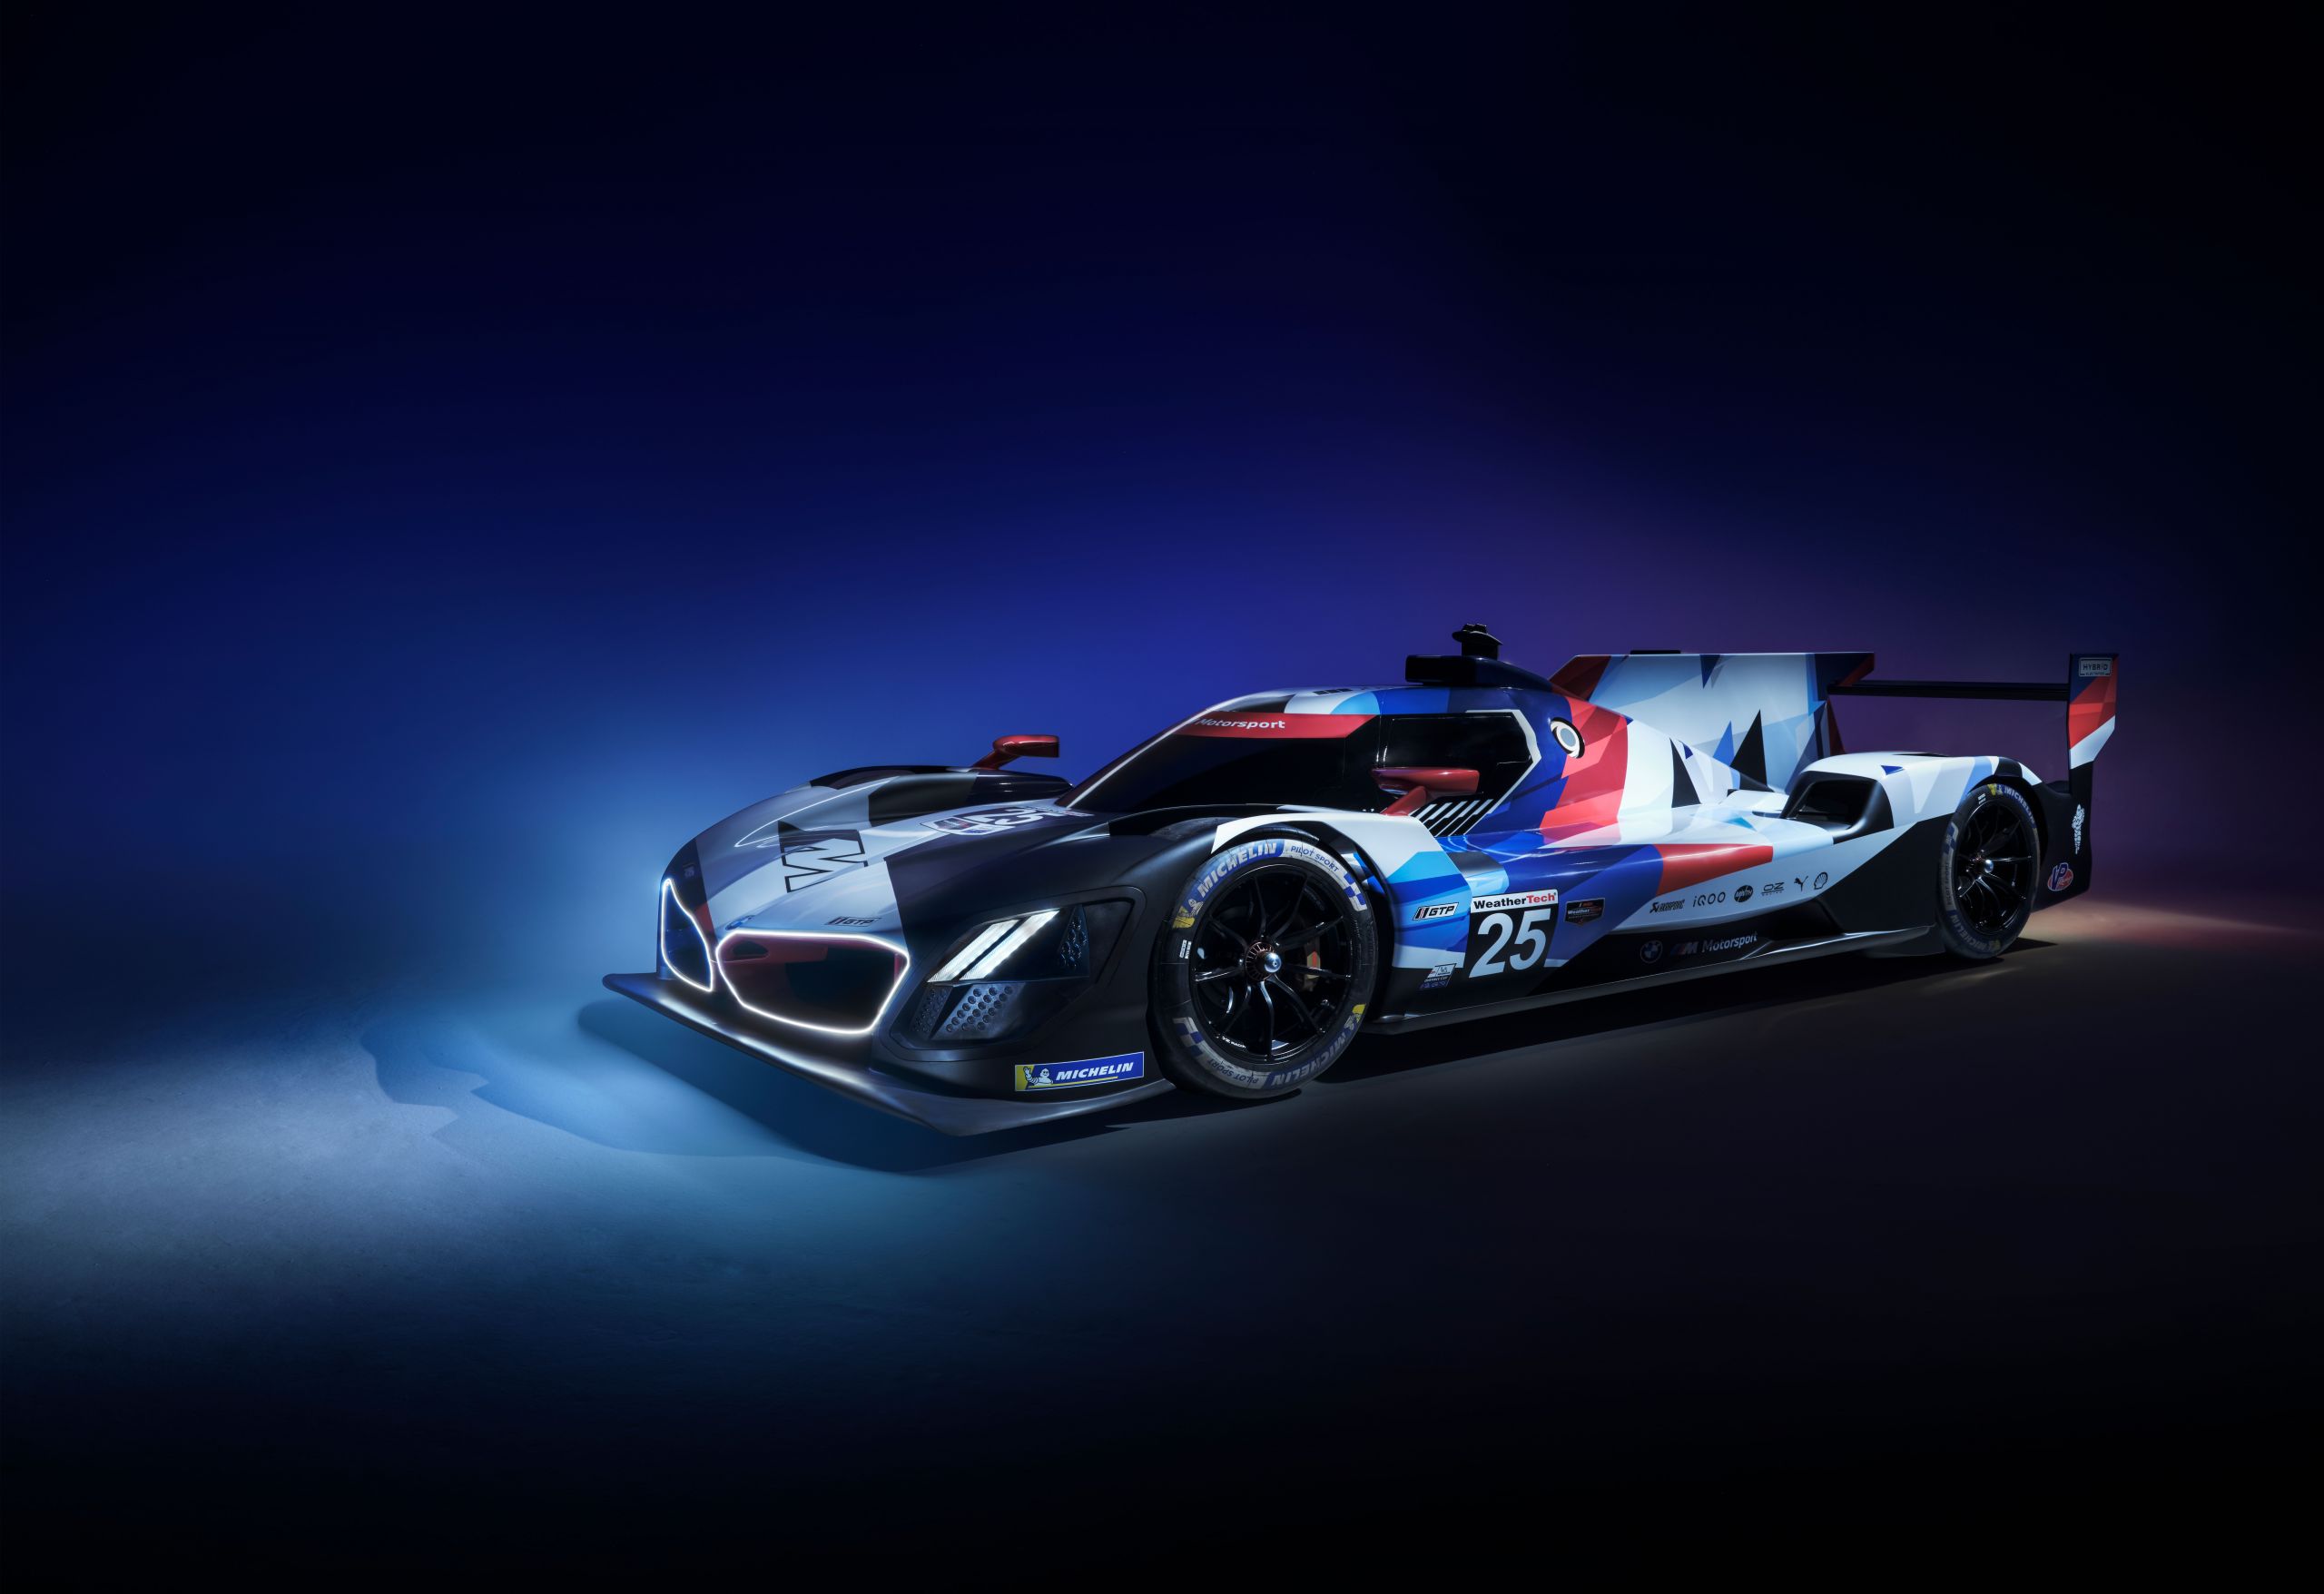 World premiere in Los Angeles: BMW M Motorsport unveils the BMW M Hybrid V8 in its race livery and announces 2023 IMSA season drivers